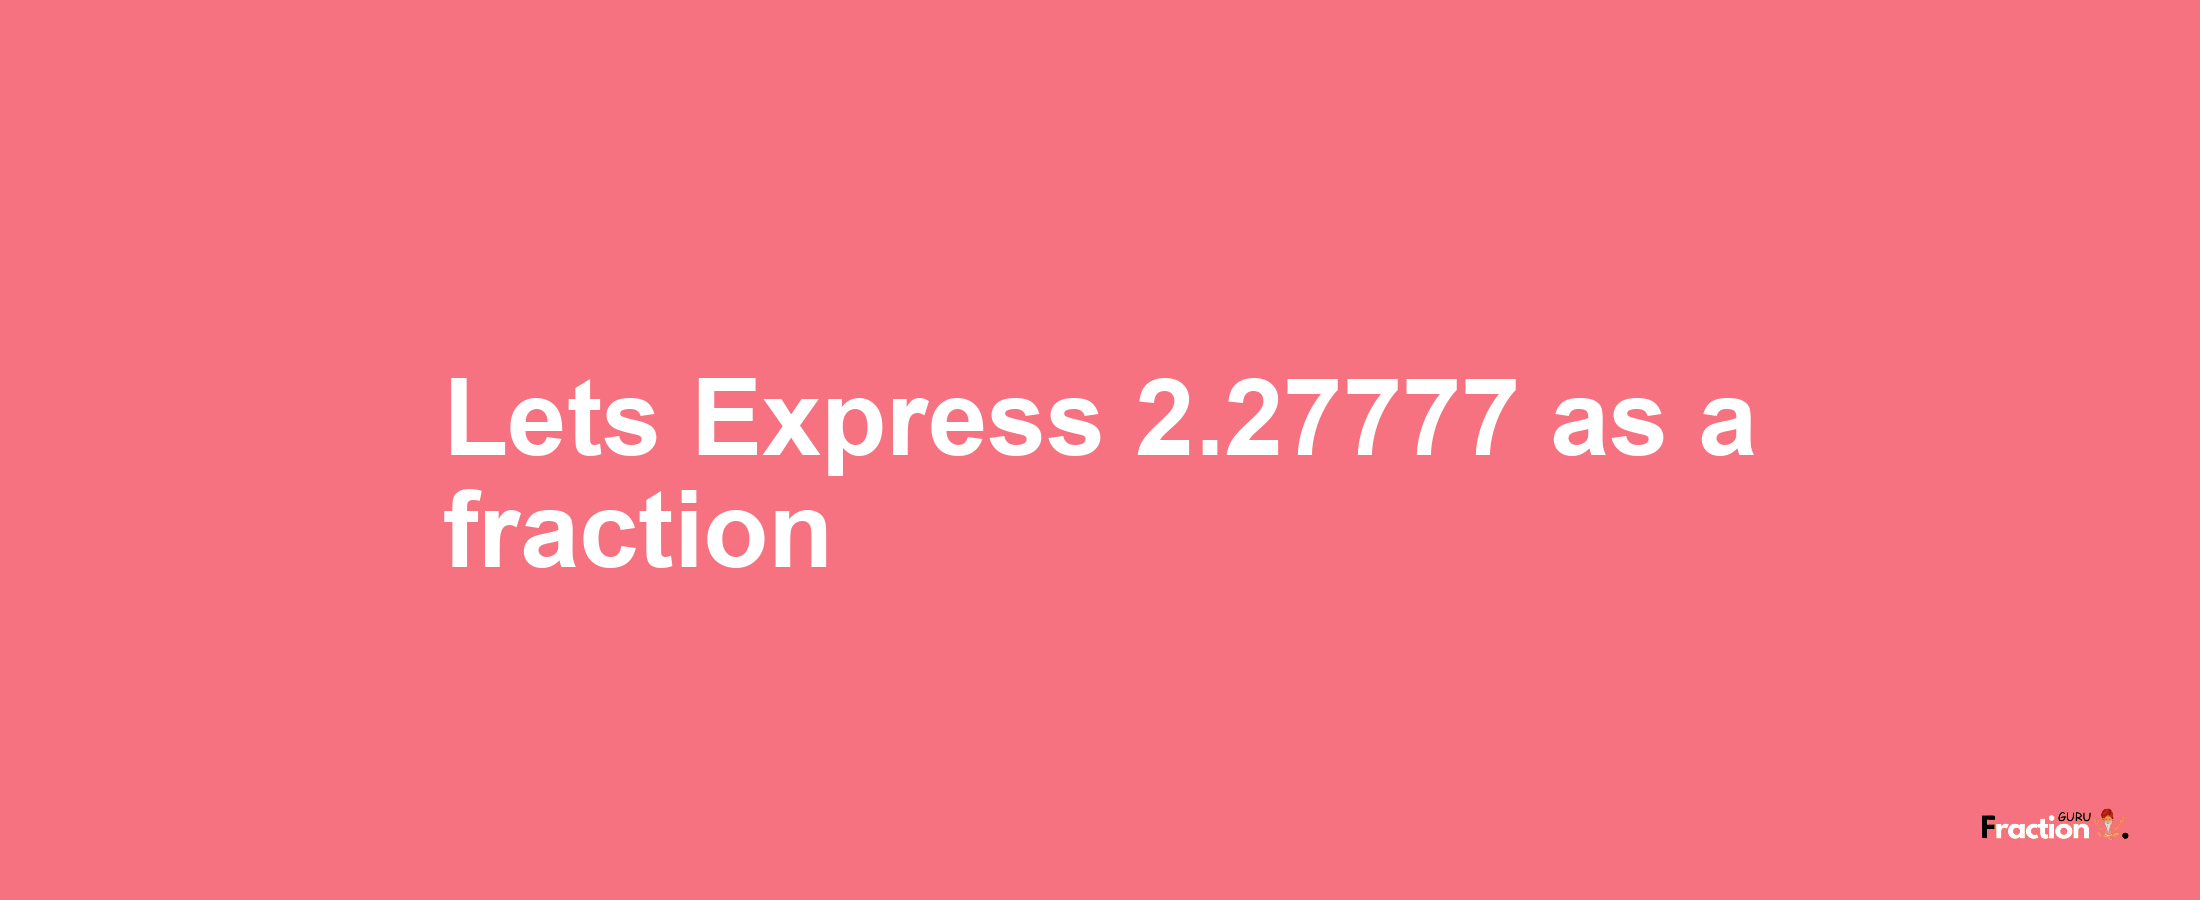 Lets Express 2.27777 as afraction